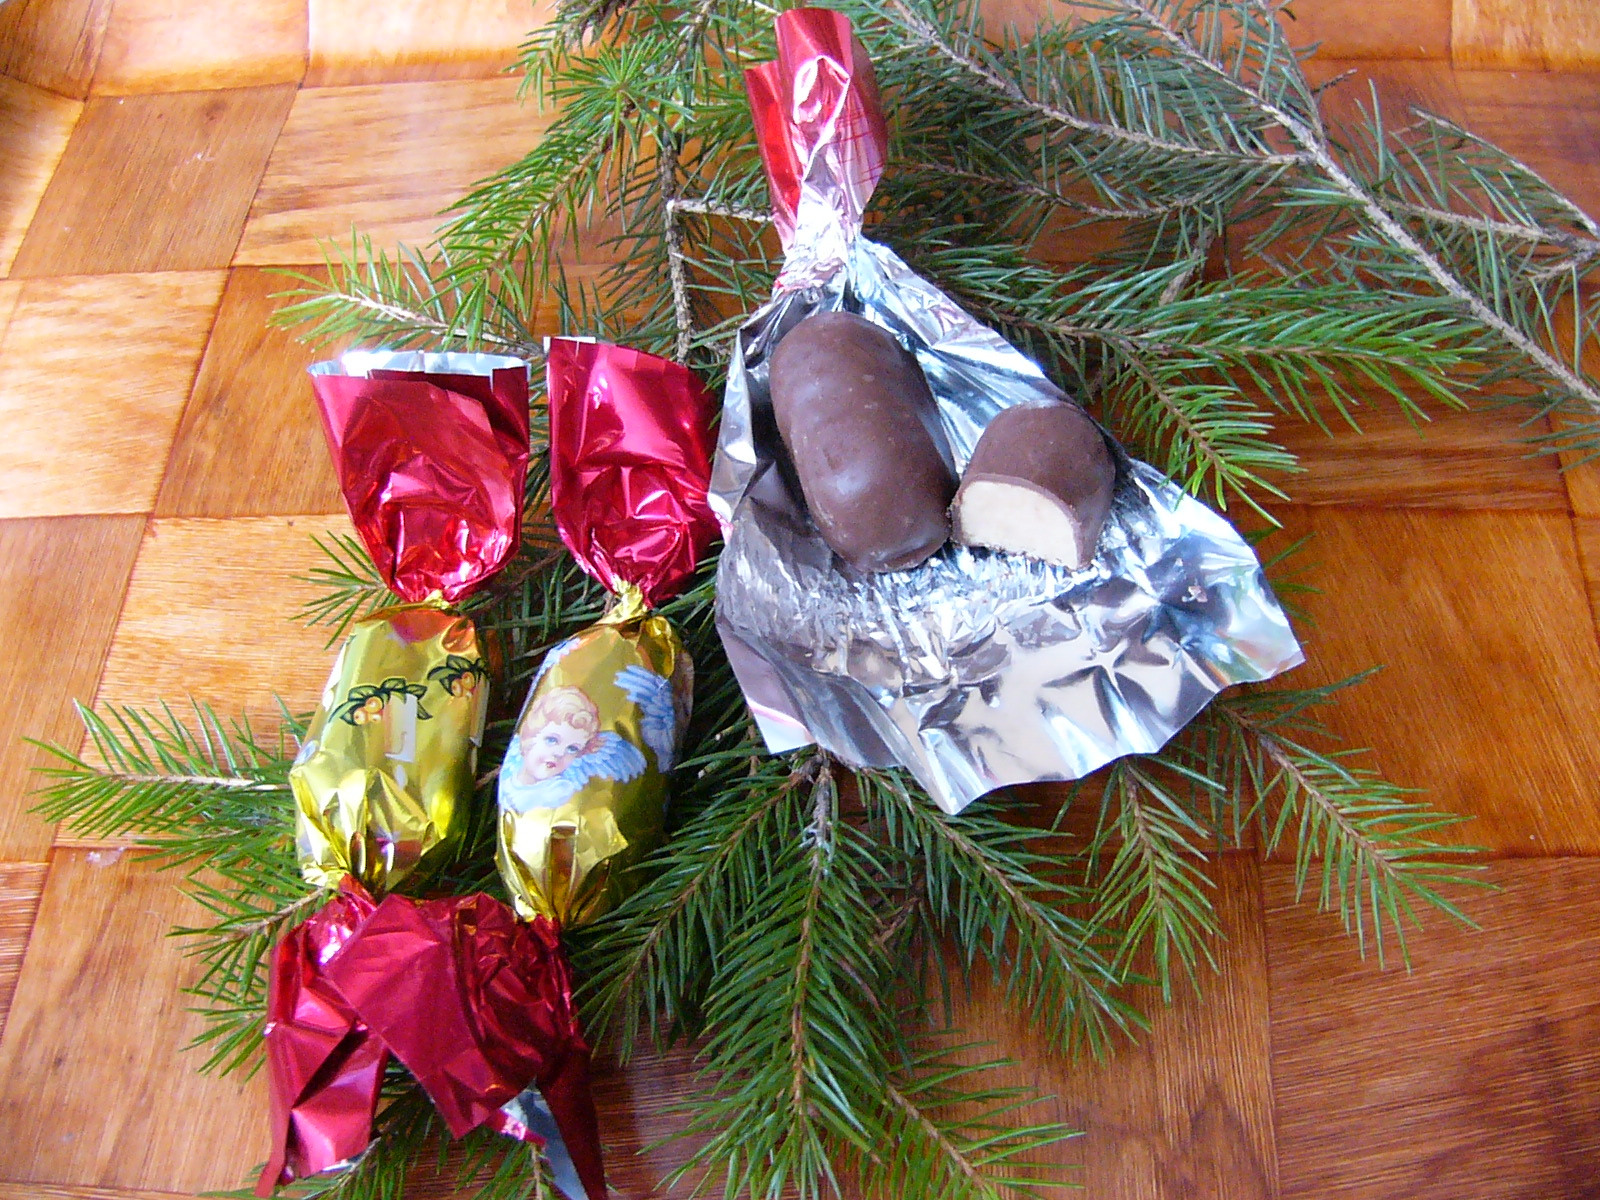 Hungarian Christmas Candy
 100 Years in America Reflections from underneath the